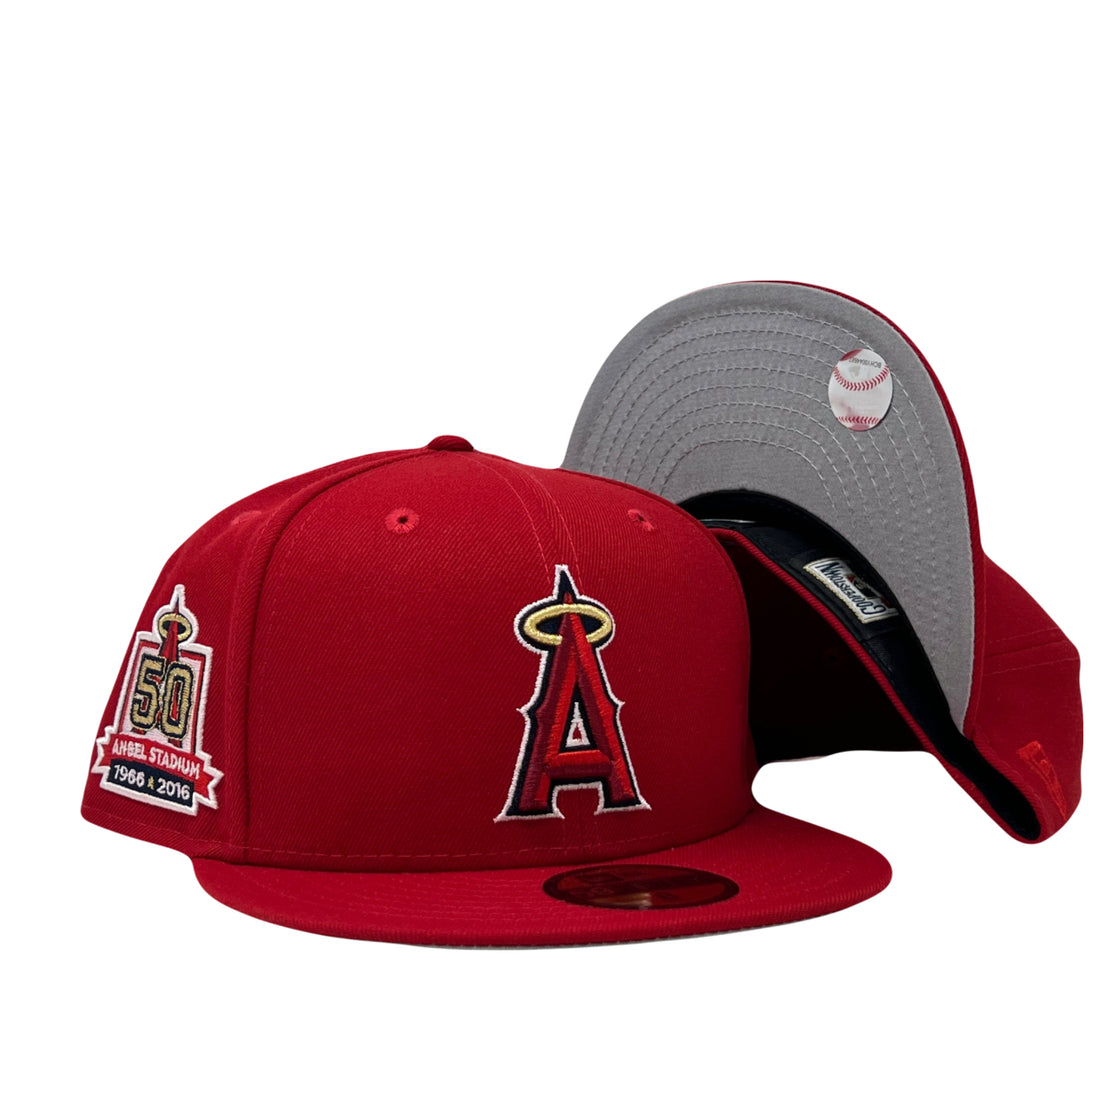 Los Angeles Angels 50th Anniversary Red Gray Brim New Era Fitted Hat